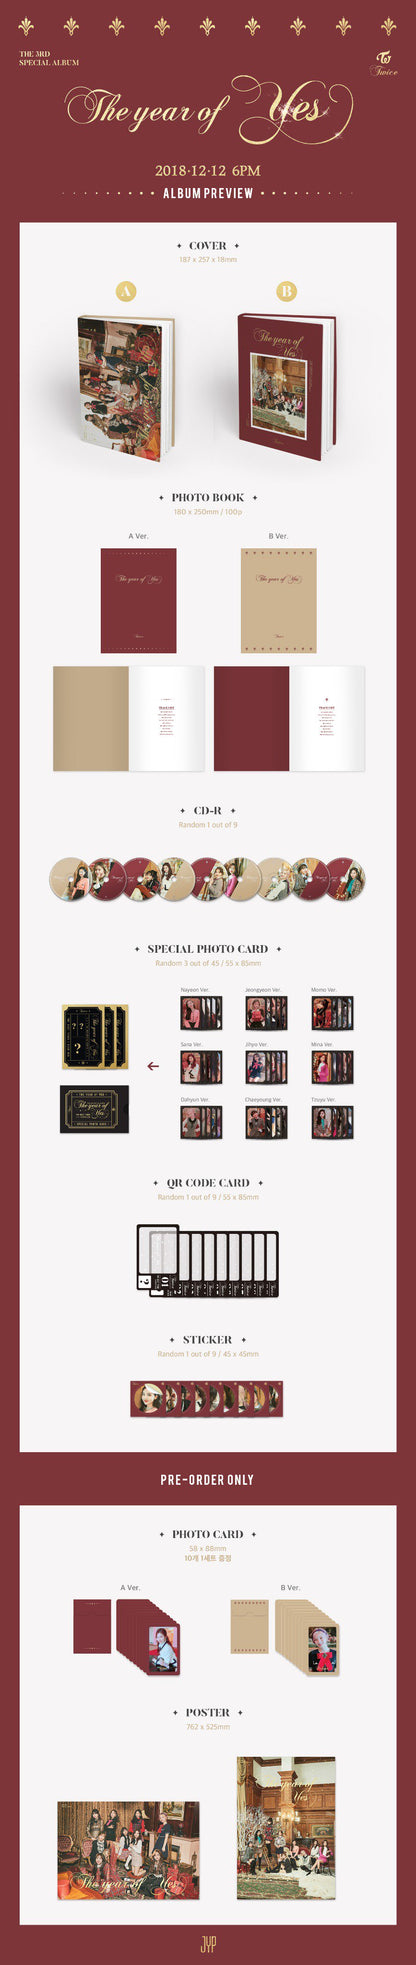 TWICE'S 3RD SPECIAL ALBUM [THE YEAR OF YES]